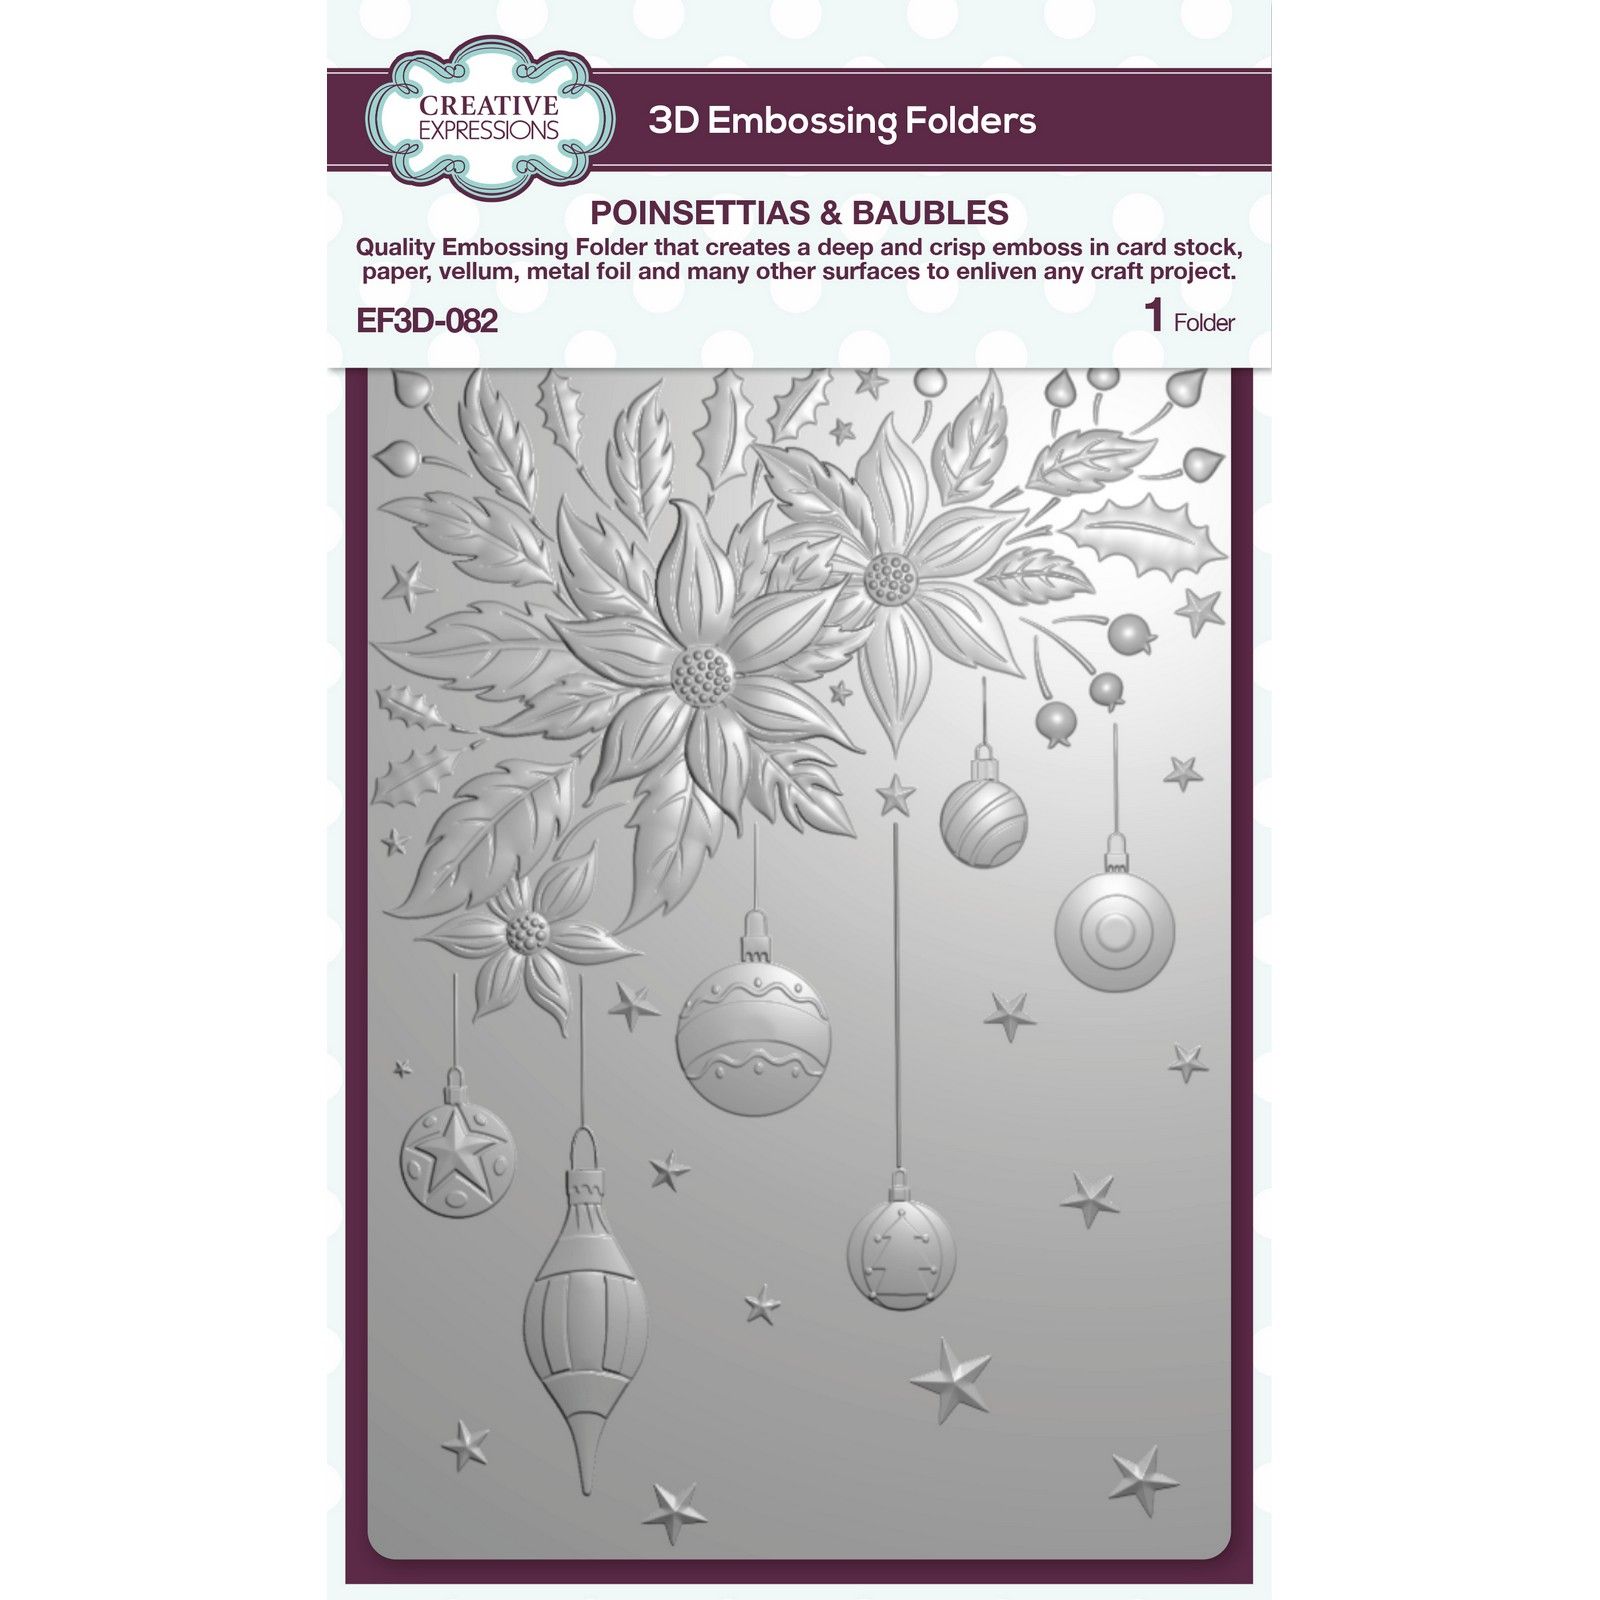 Creative Expressions • Poinsettias & Baubles 5 in x 7 in 3D Embossing Folder